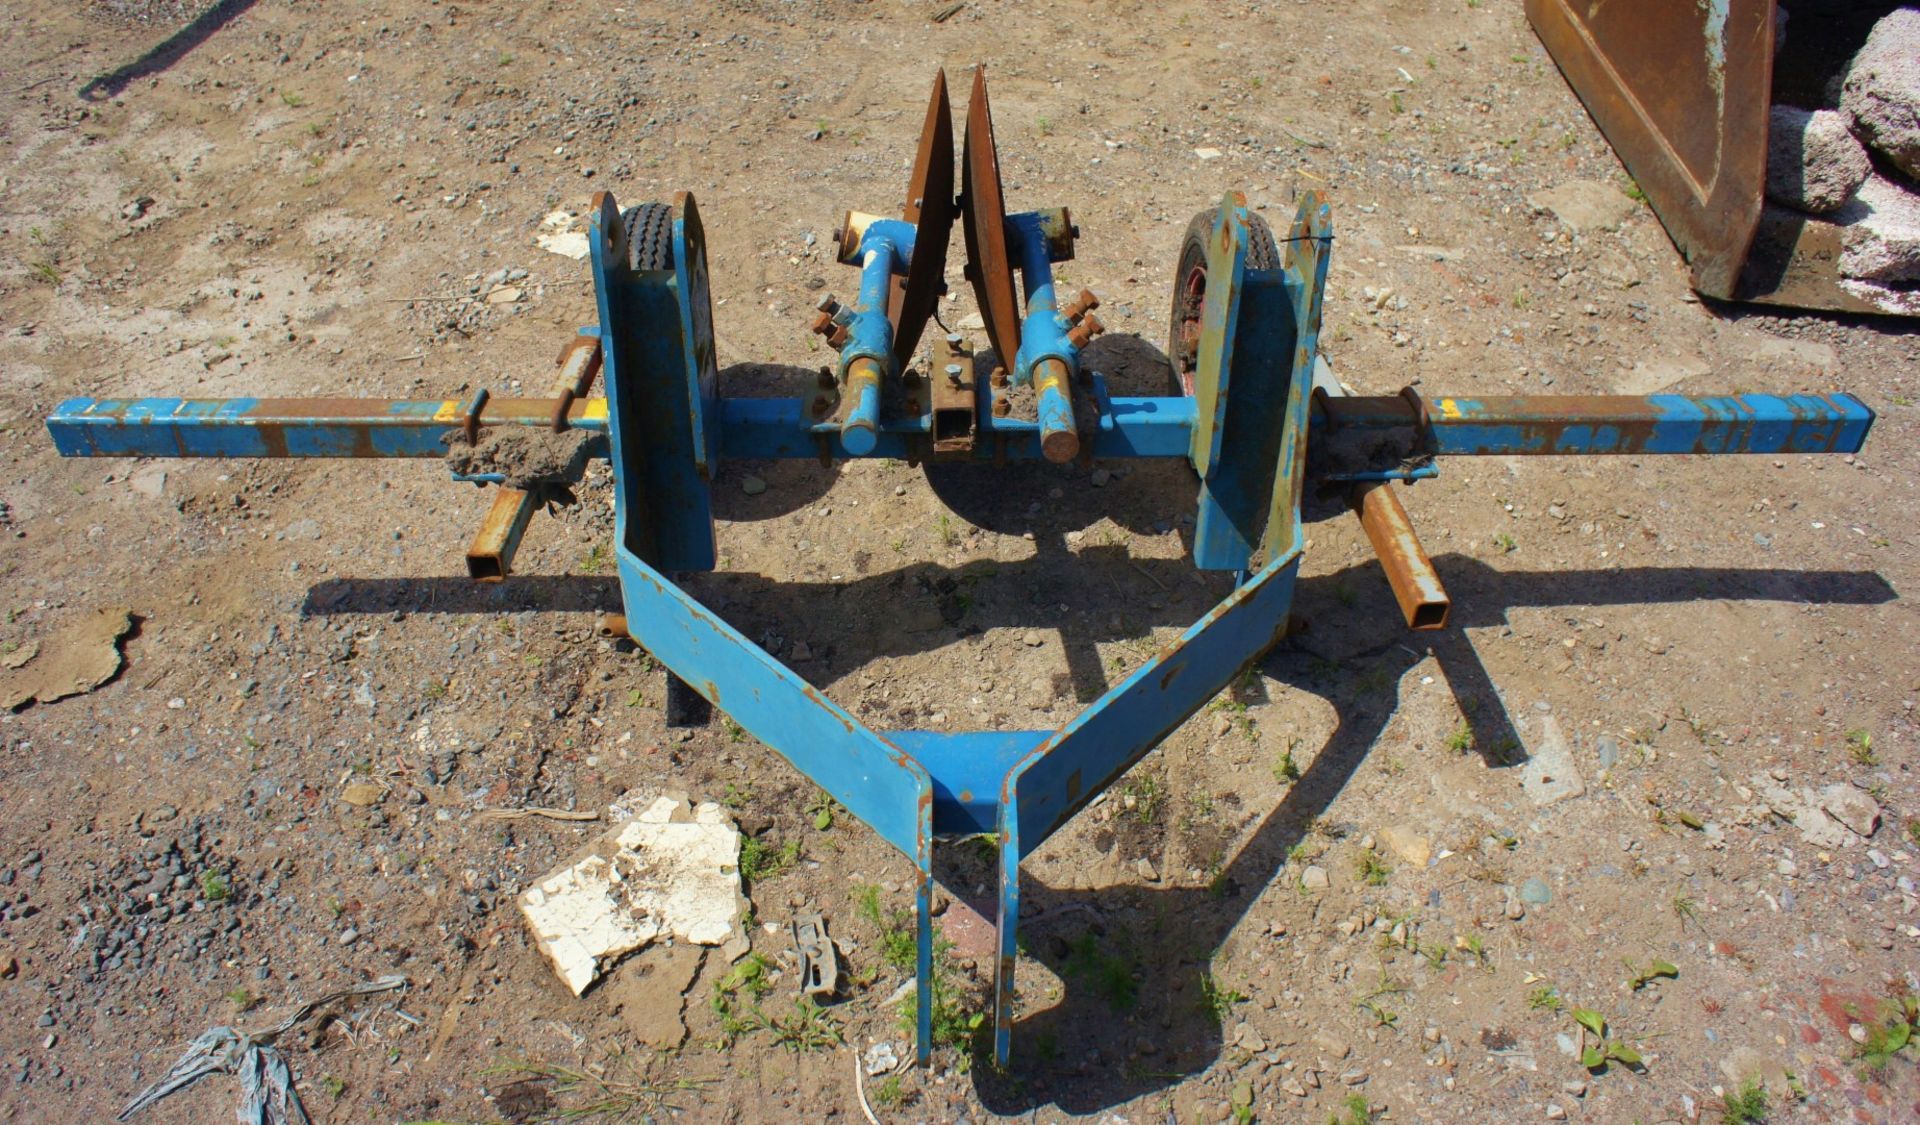 Blue Frame Twin Disk Harrow Attachment - Image 4 of 4